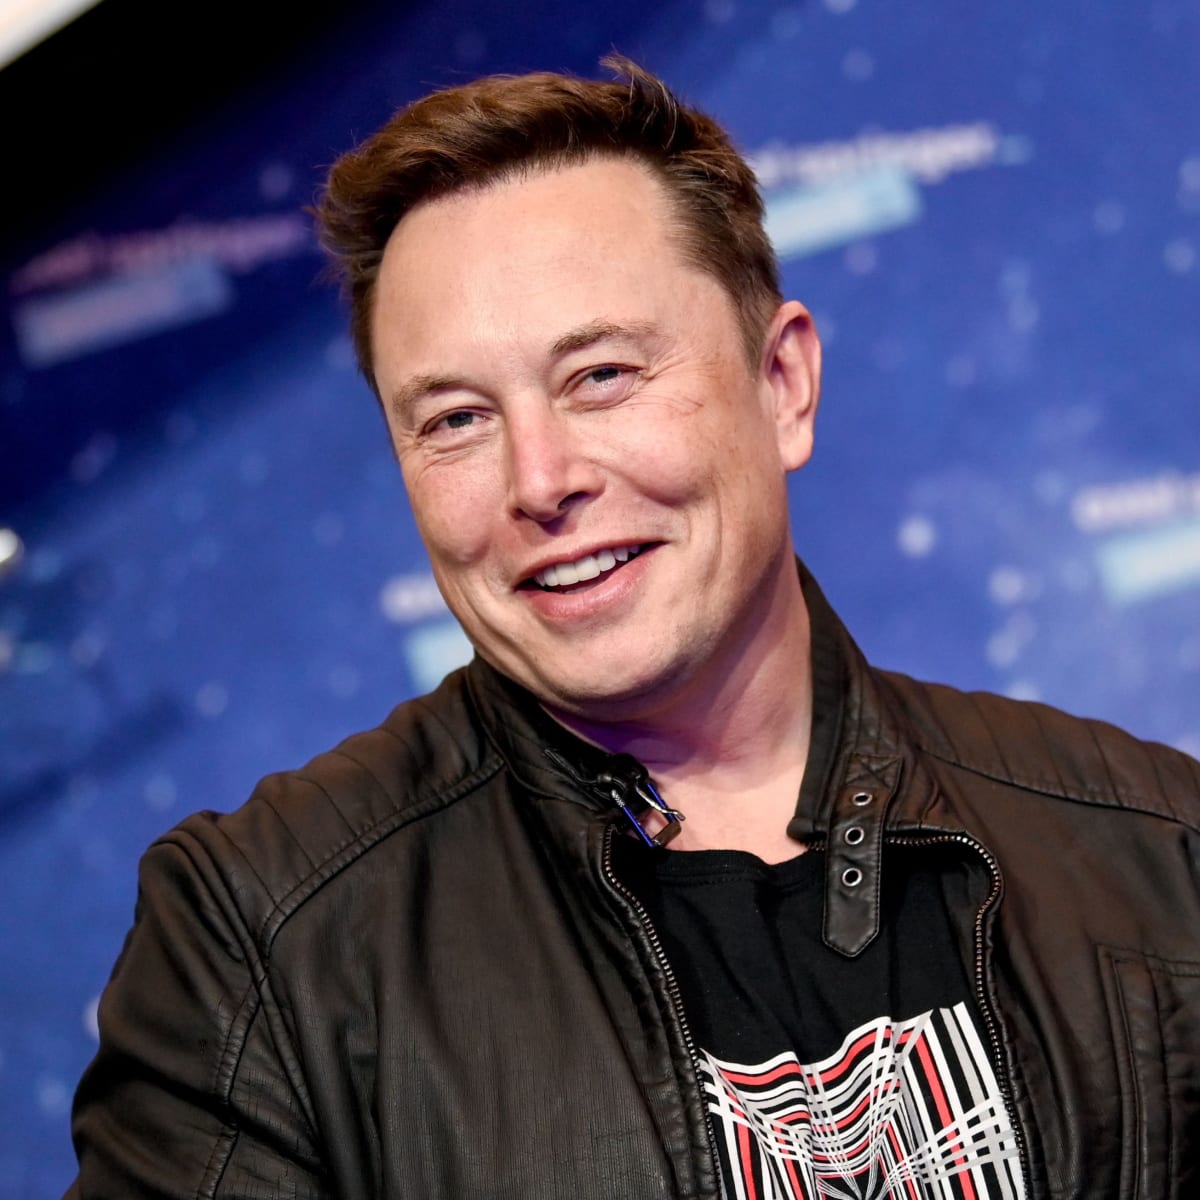 Tesla investor sues Musk, board over accusation of workplace discrimination